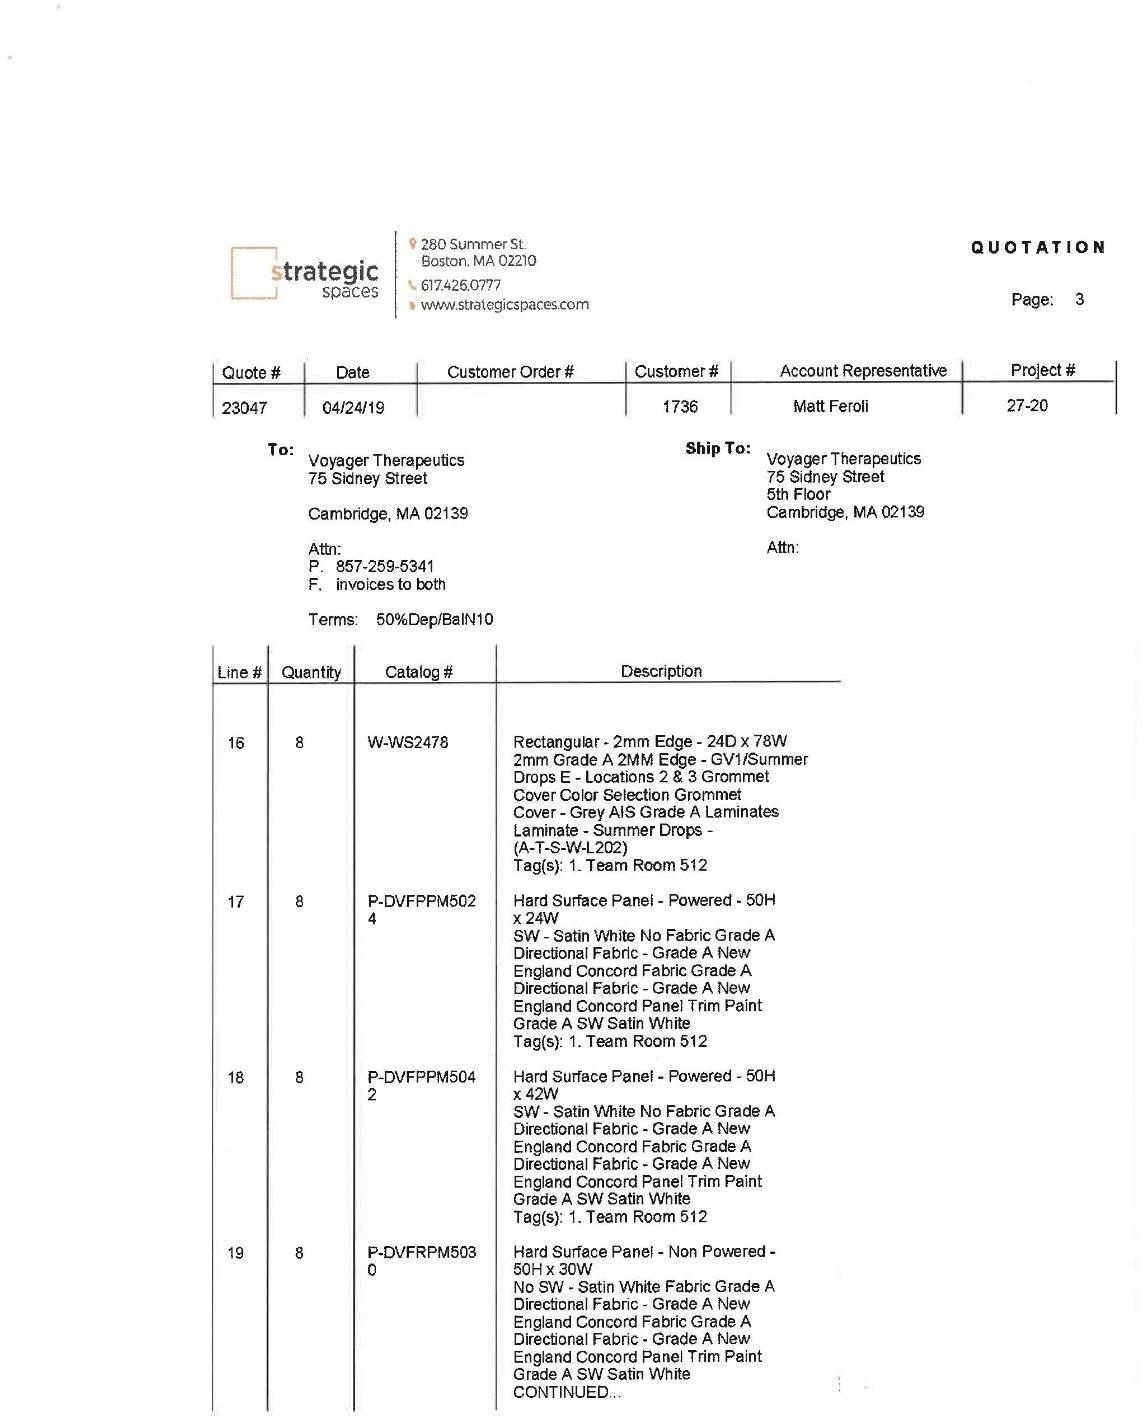 Ex C to Voyager BioNTech Sublease Agreement_Page_03